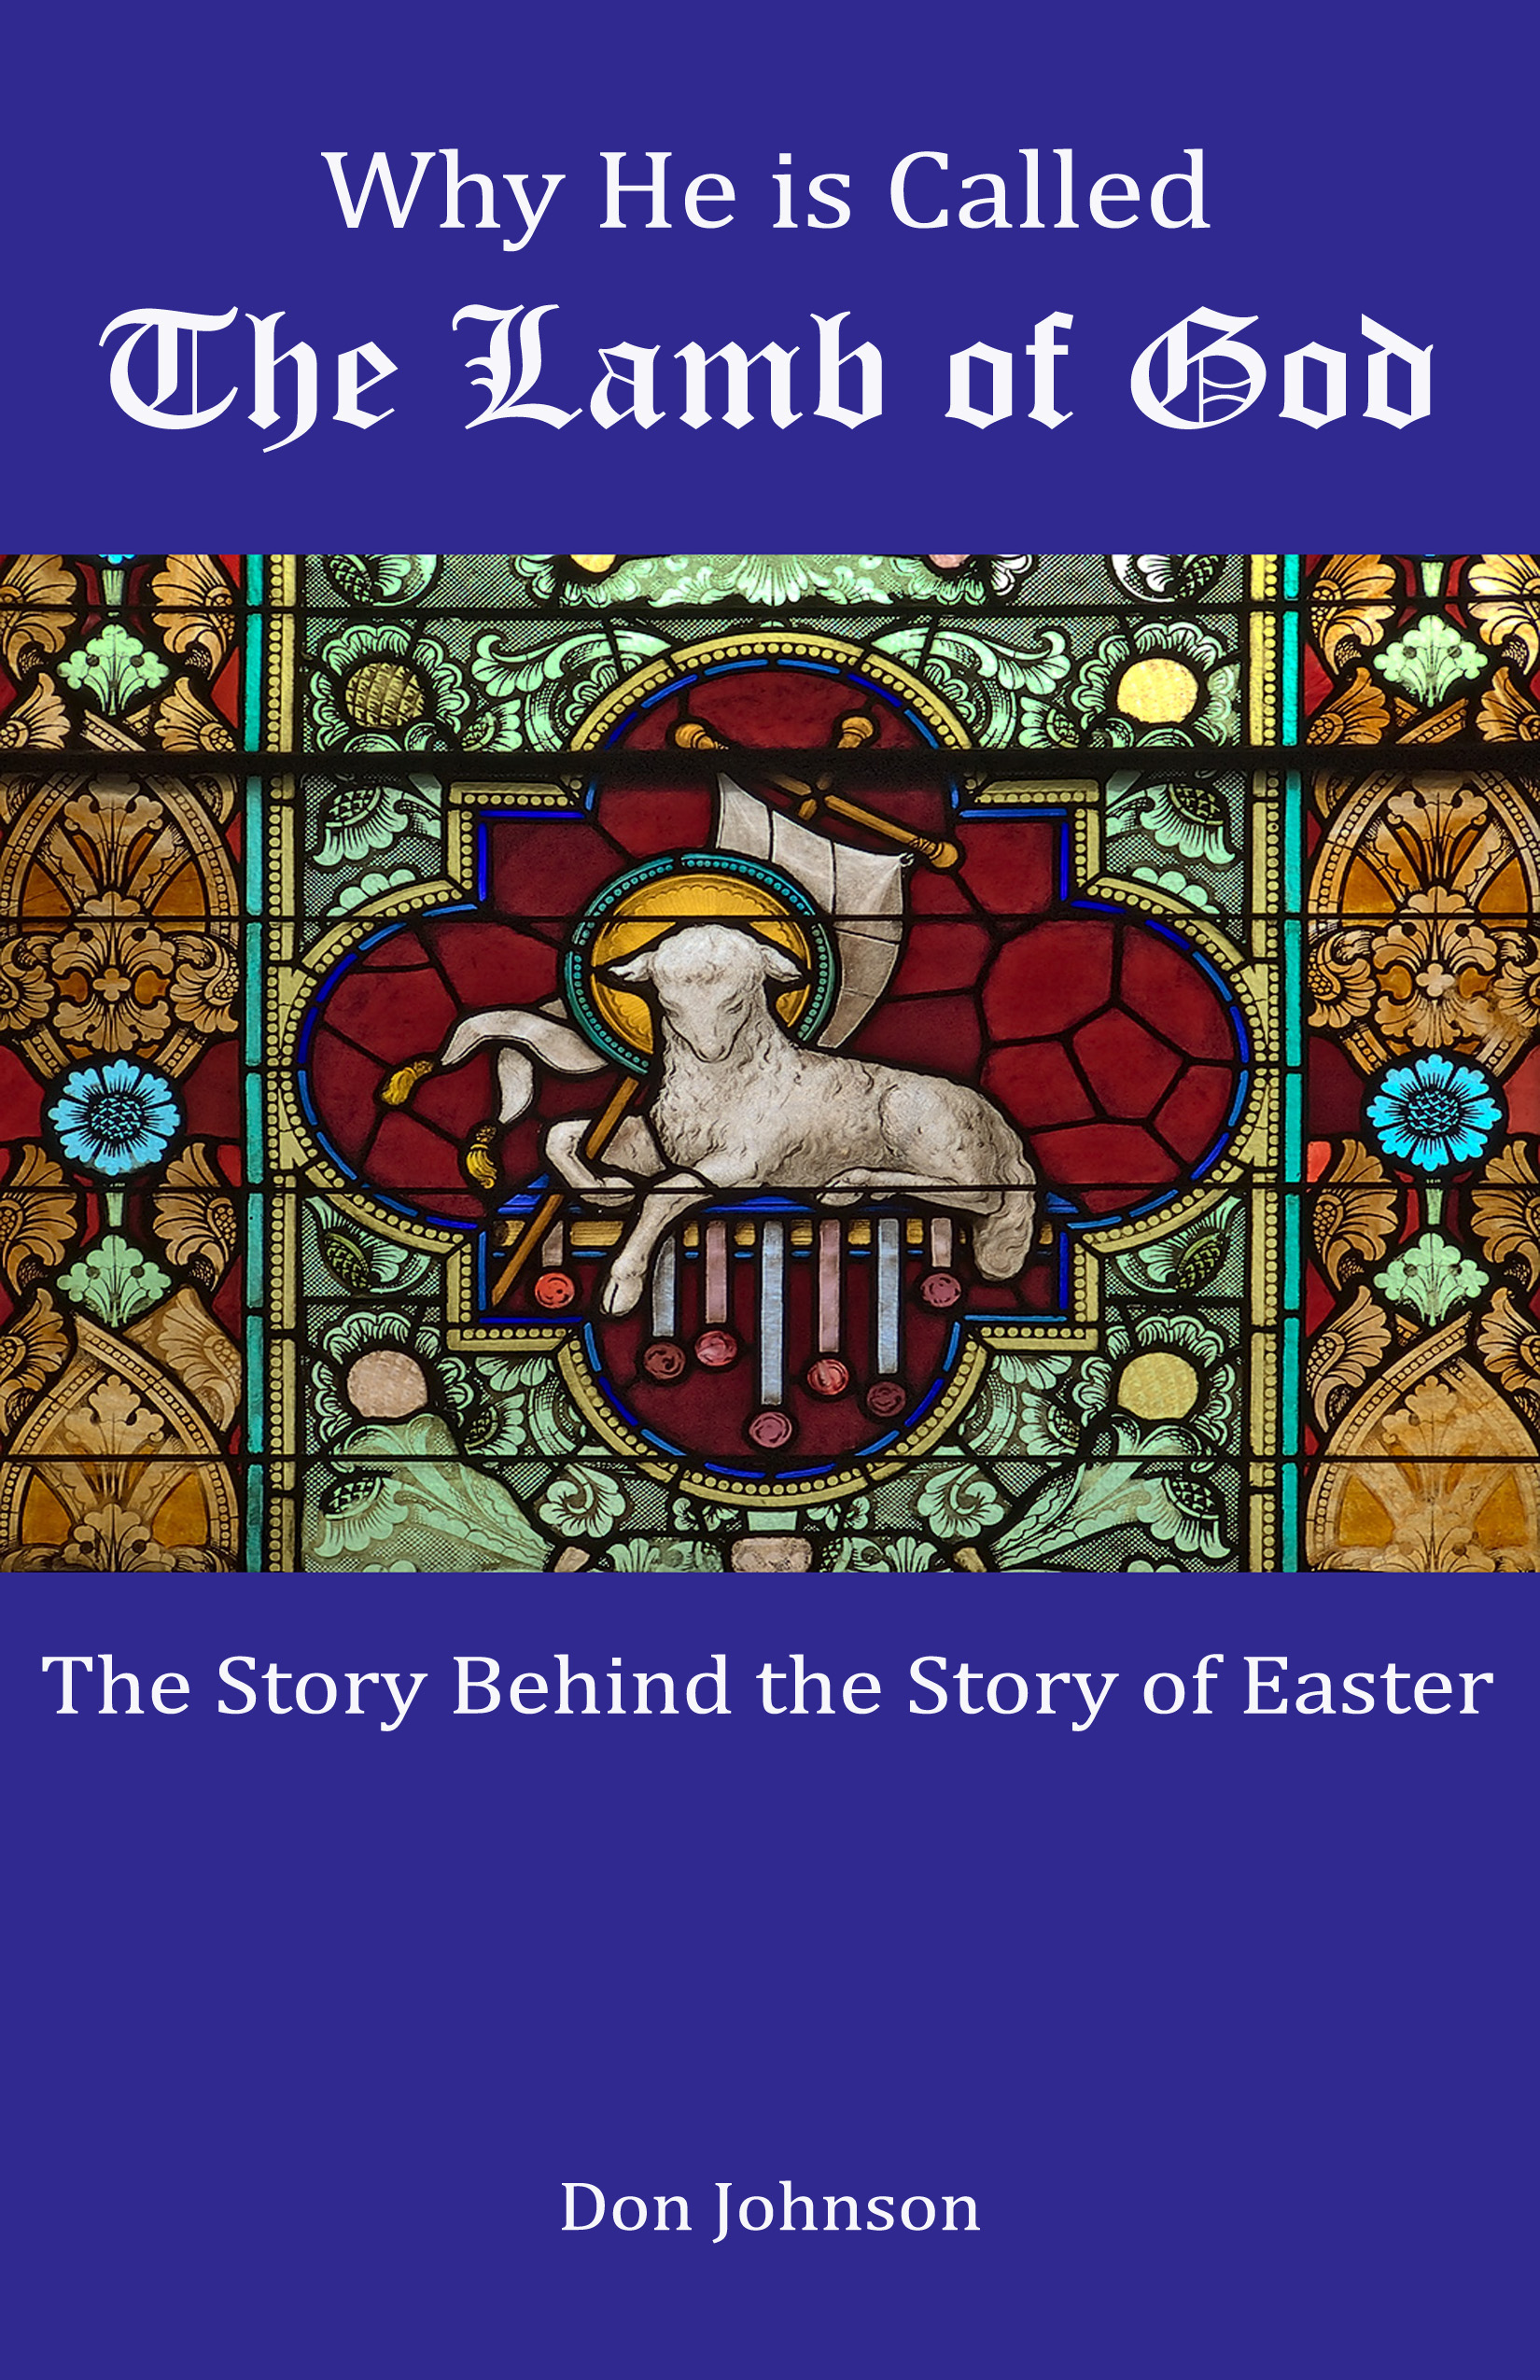 Why He is Called the Lamb of God: The Story Behind the Story of Easter